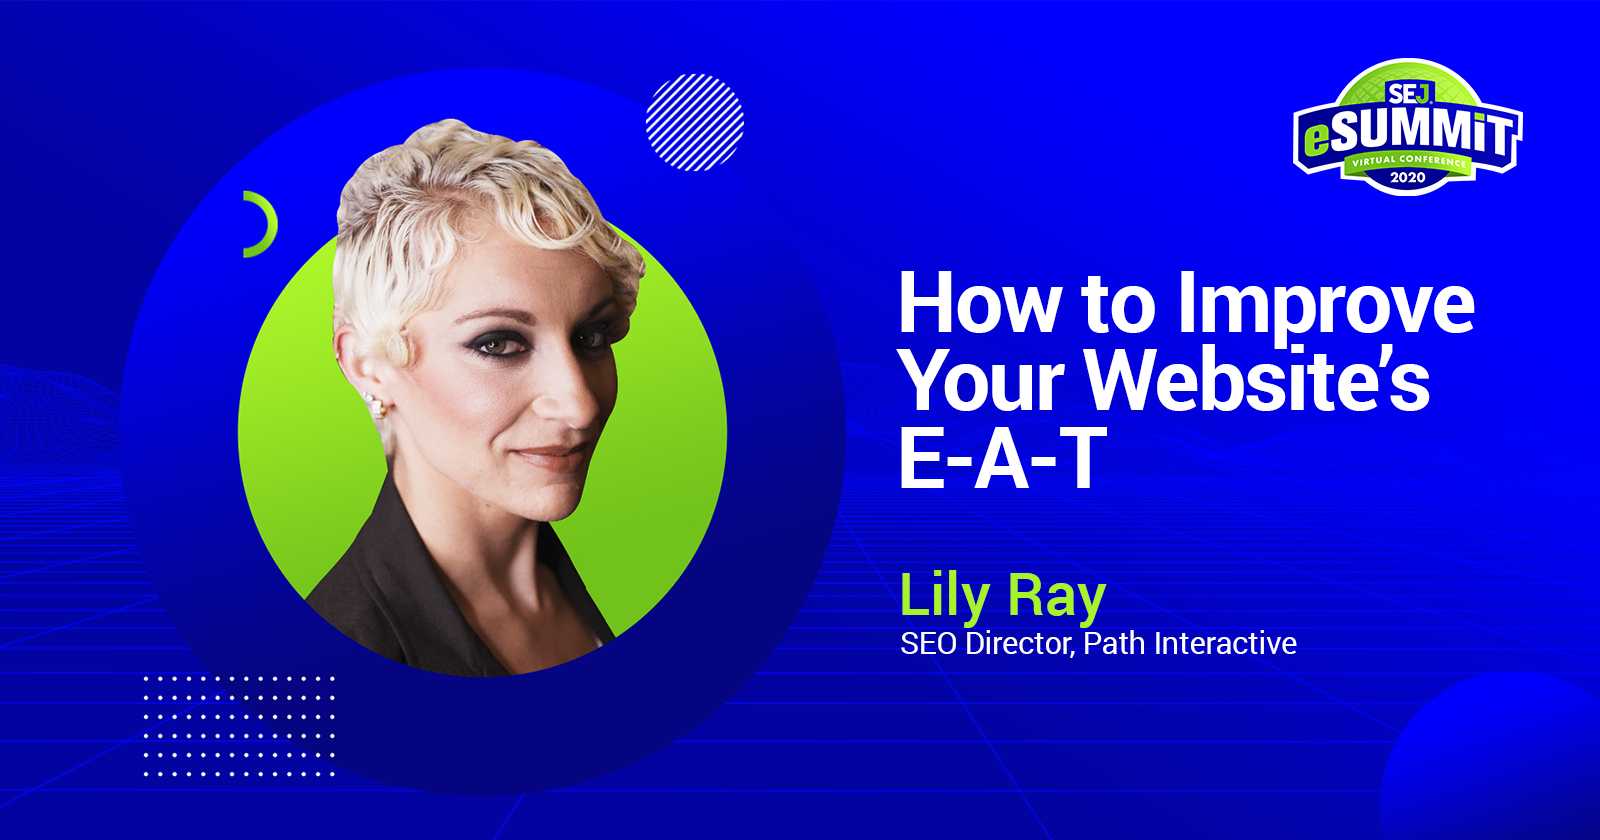 Lily Ray on SEJ eSummit - How to Improve Your Website’s E-A-T